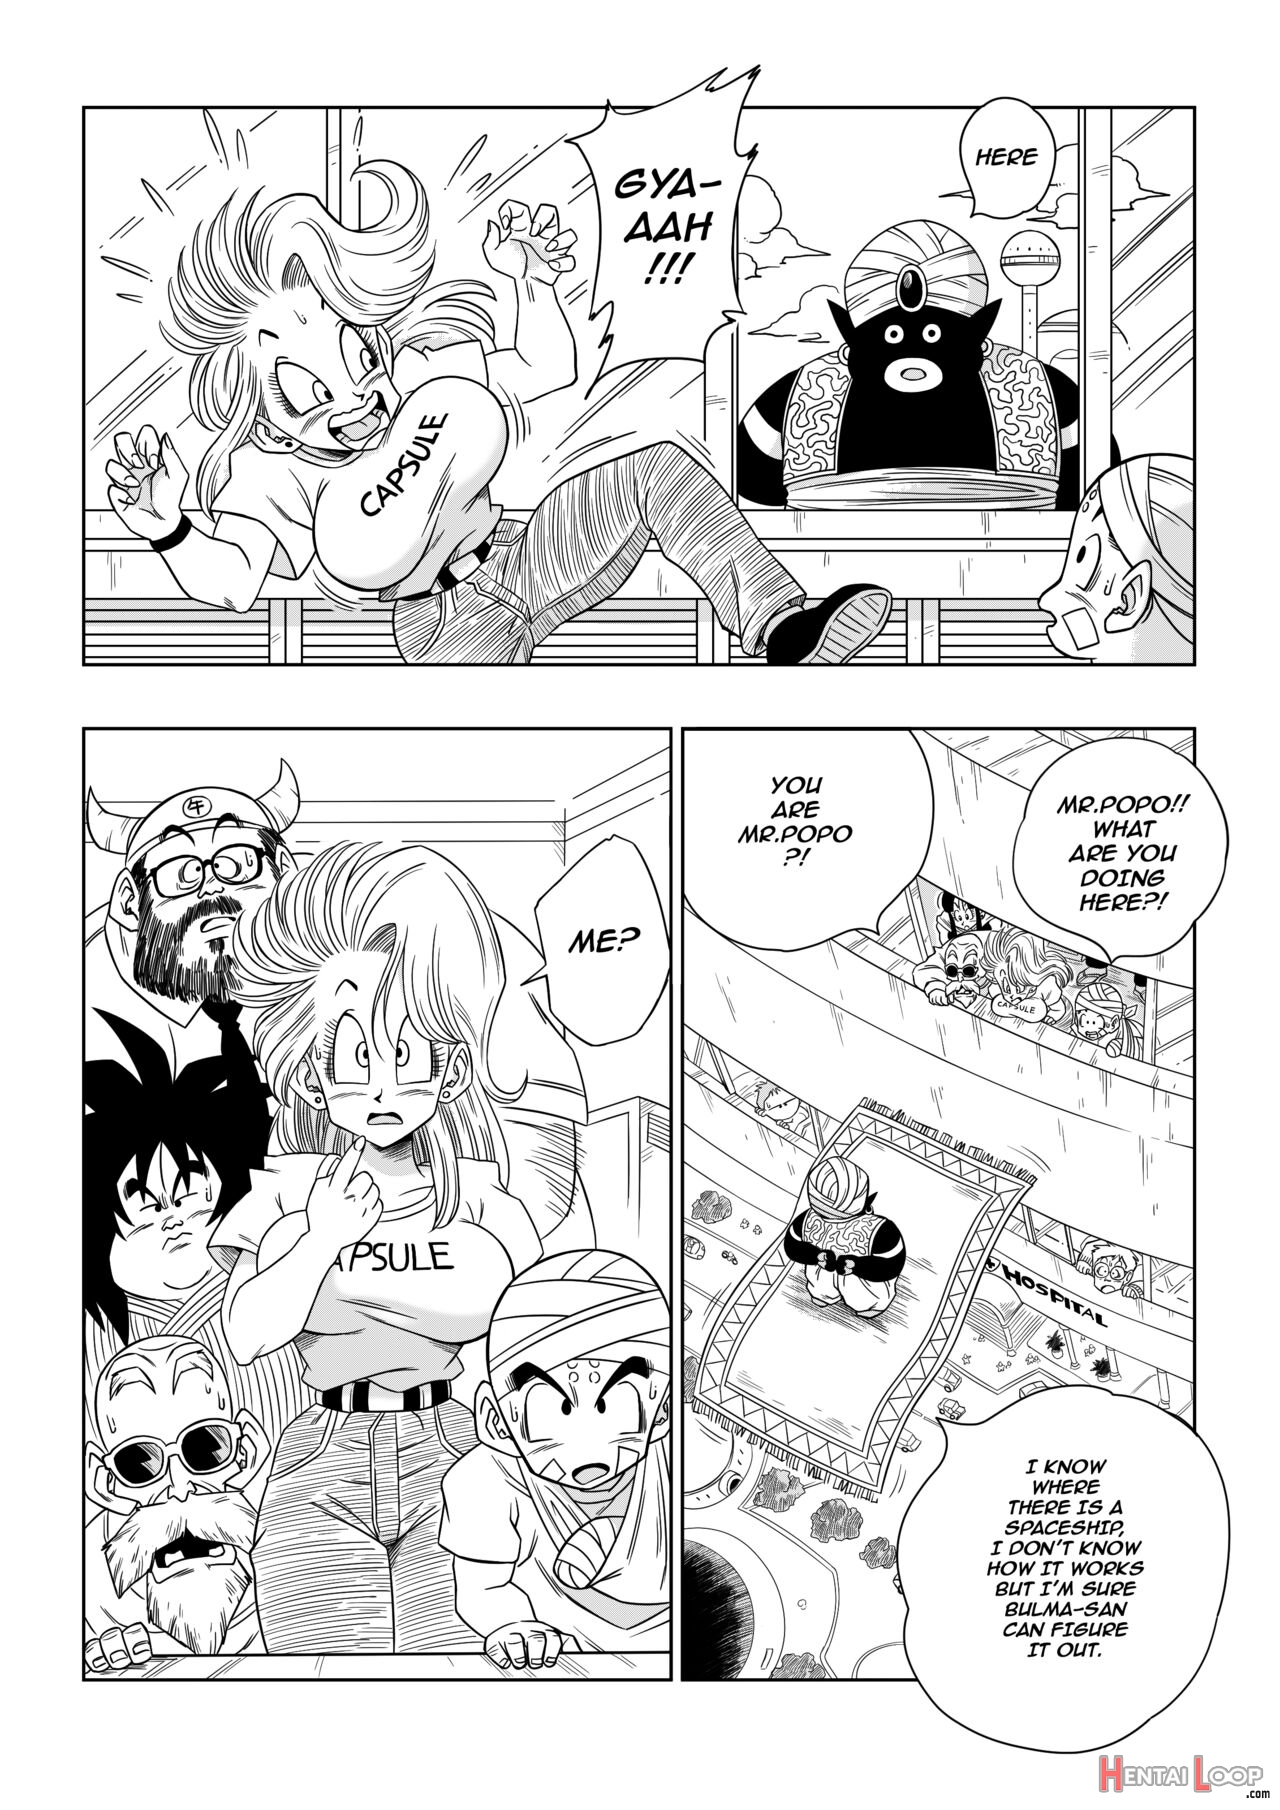 Dagon Ball - Bulma Meets Mr.popo - Sex Inside The Mysterious Spaceship! page 3